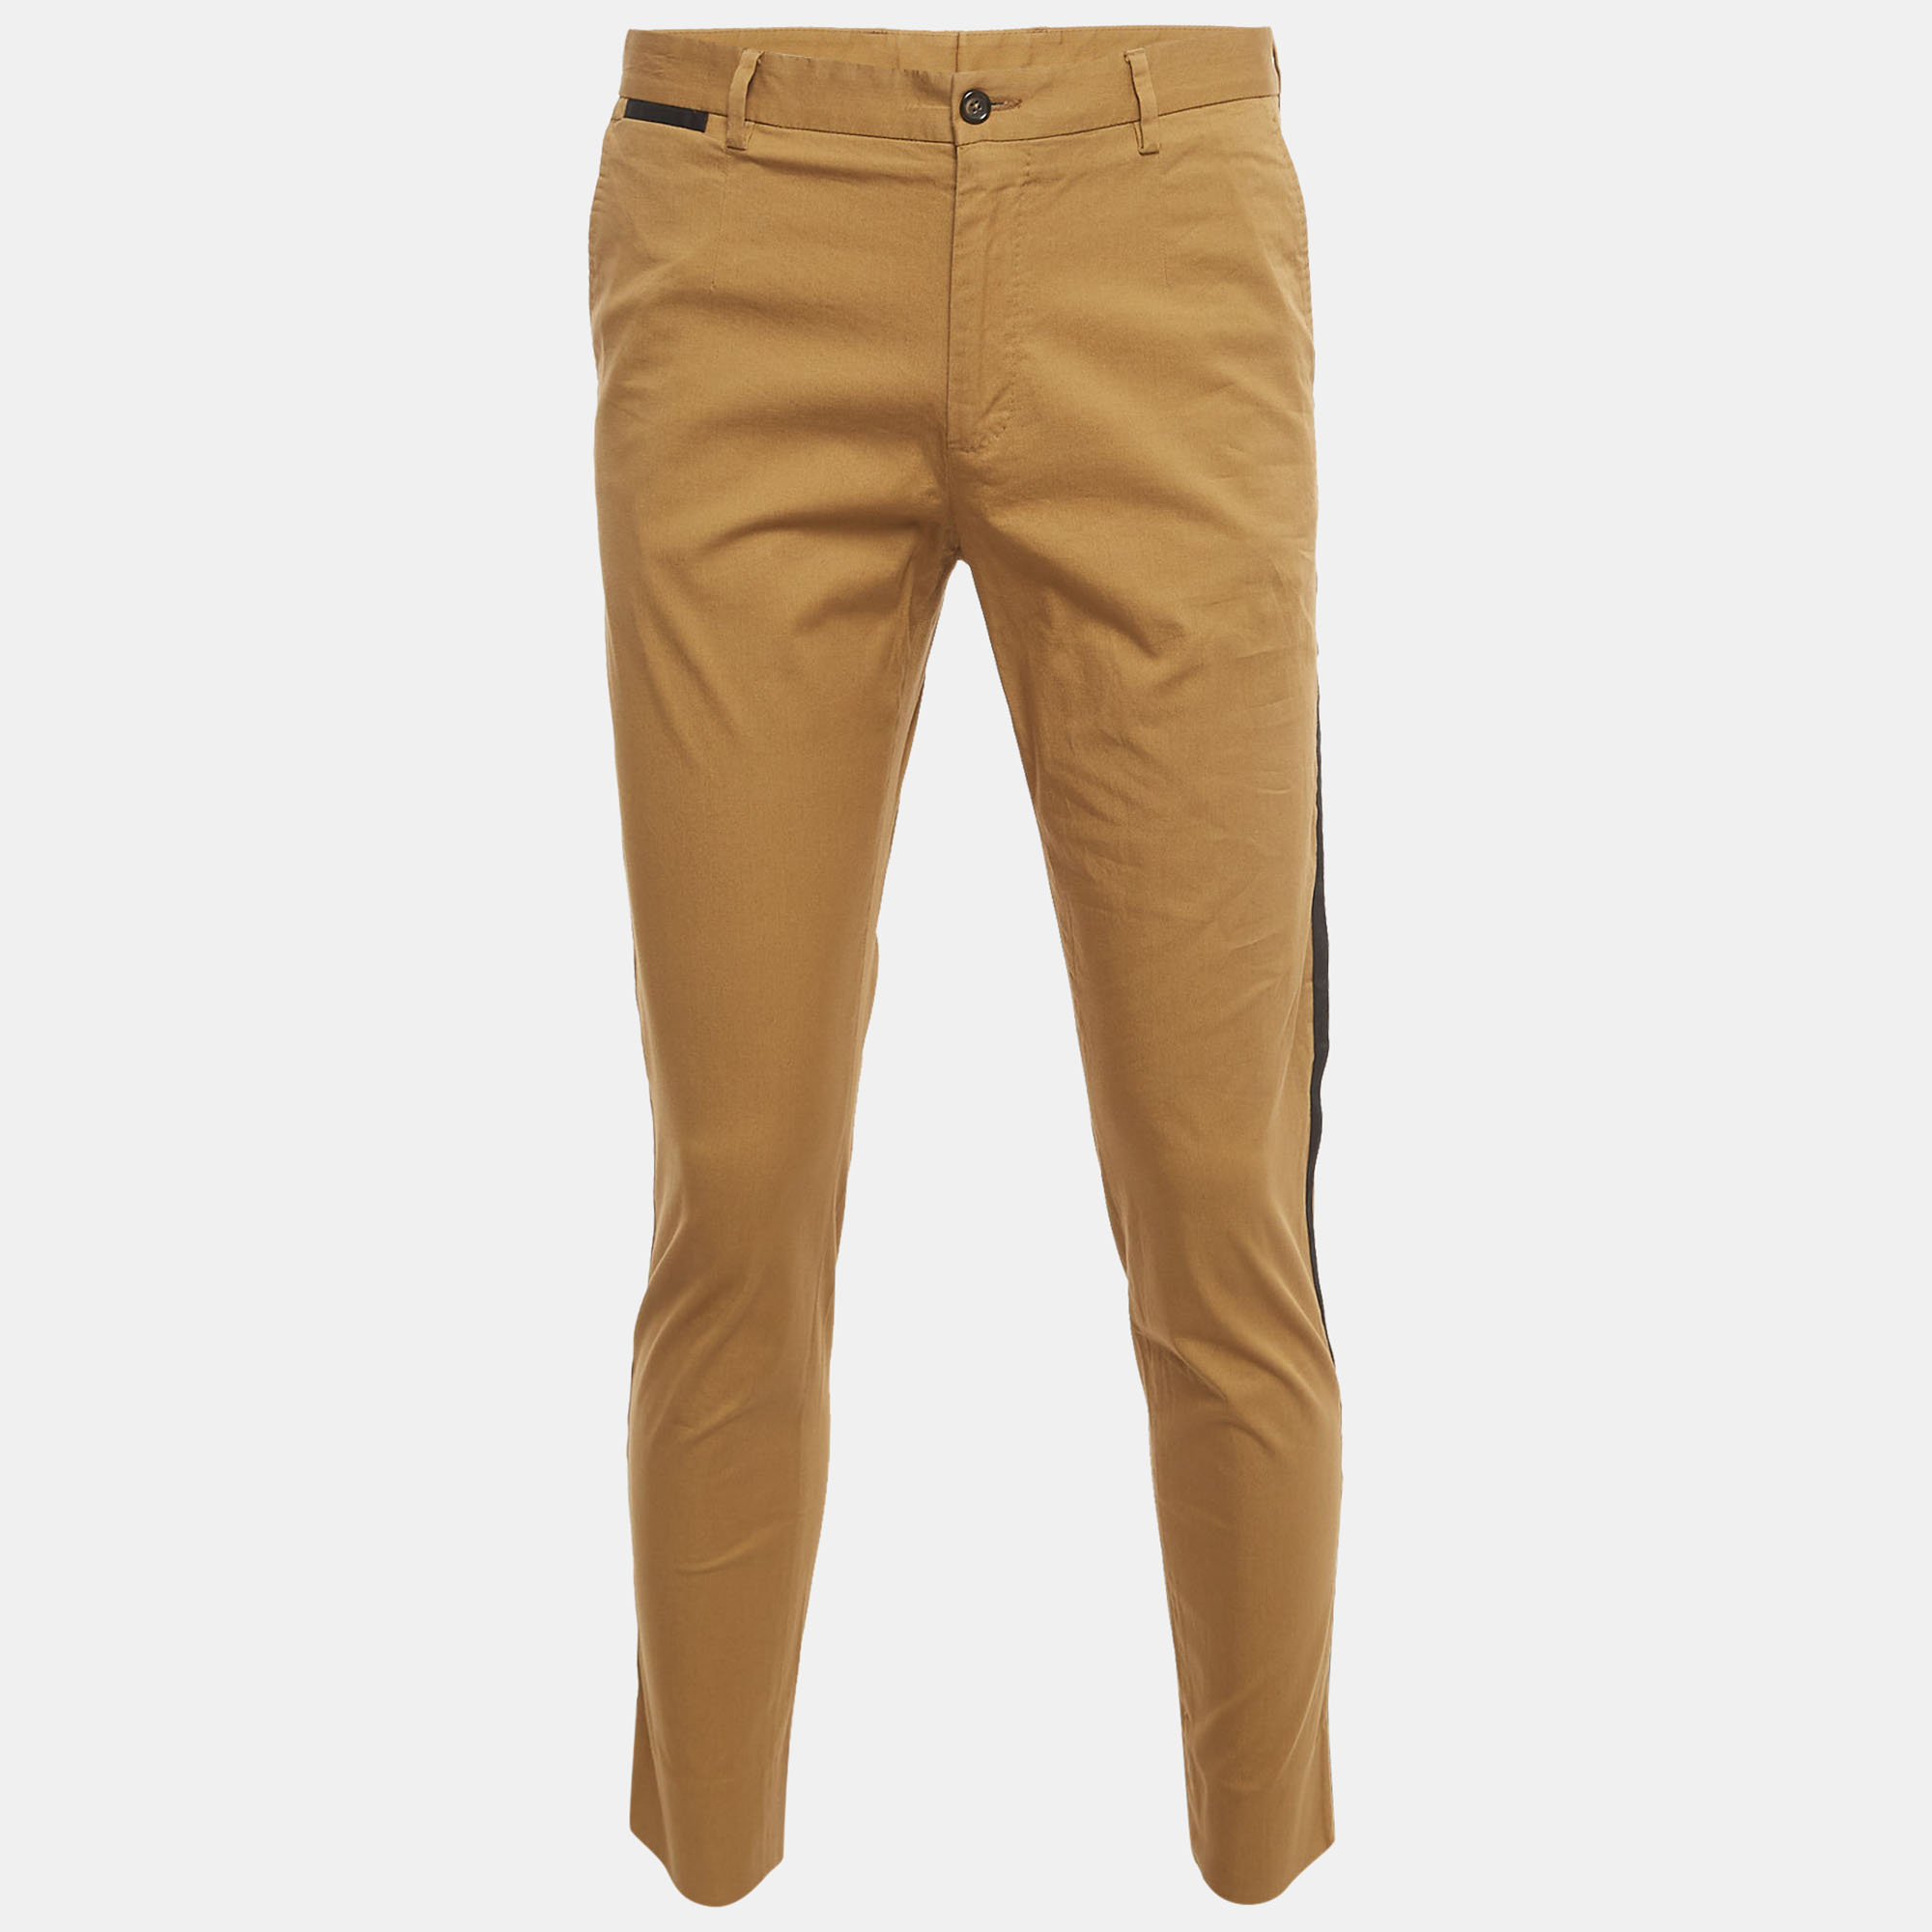 Pre-owned Dolce & Gabbana Camel Brown Cotton Slim Fit Pants M